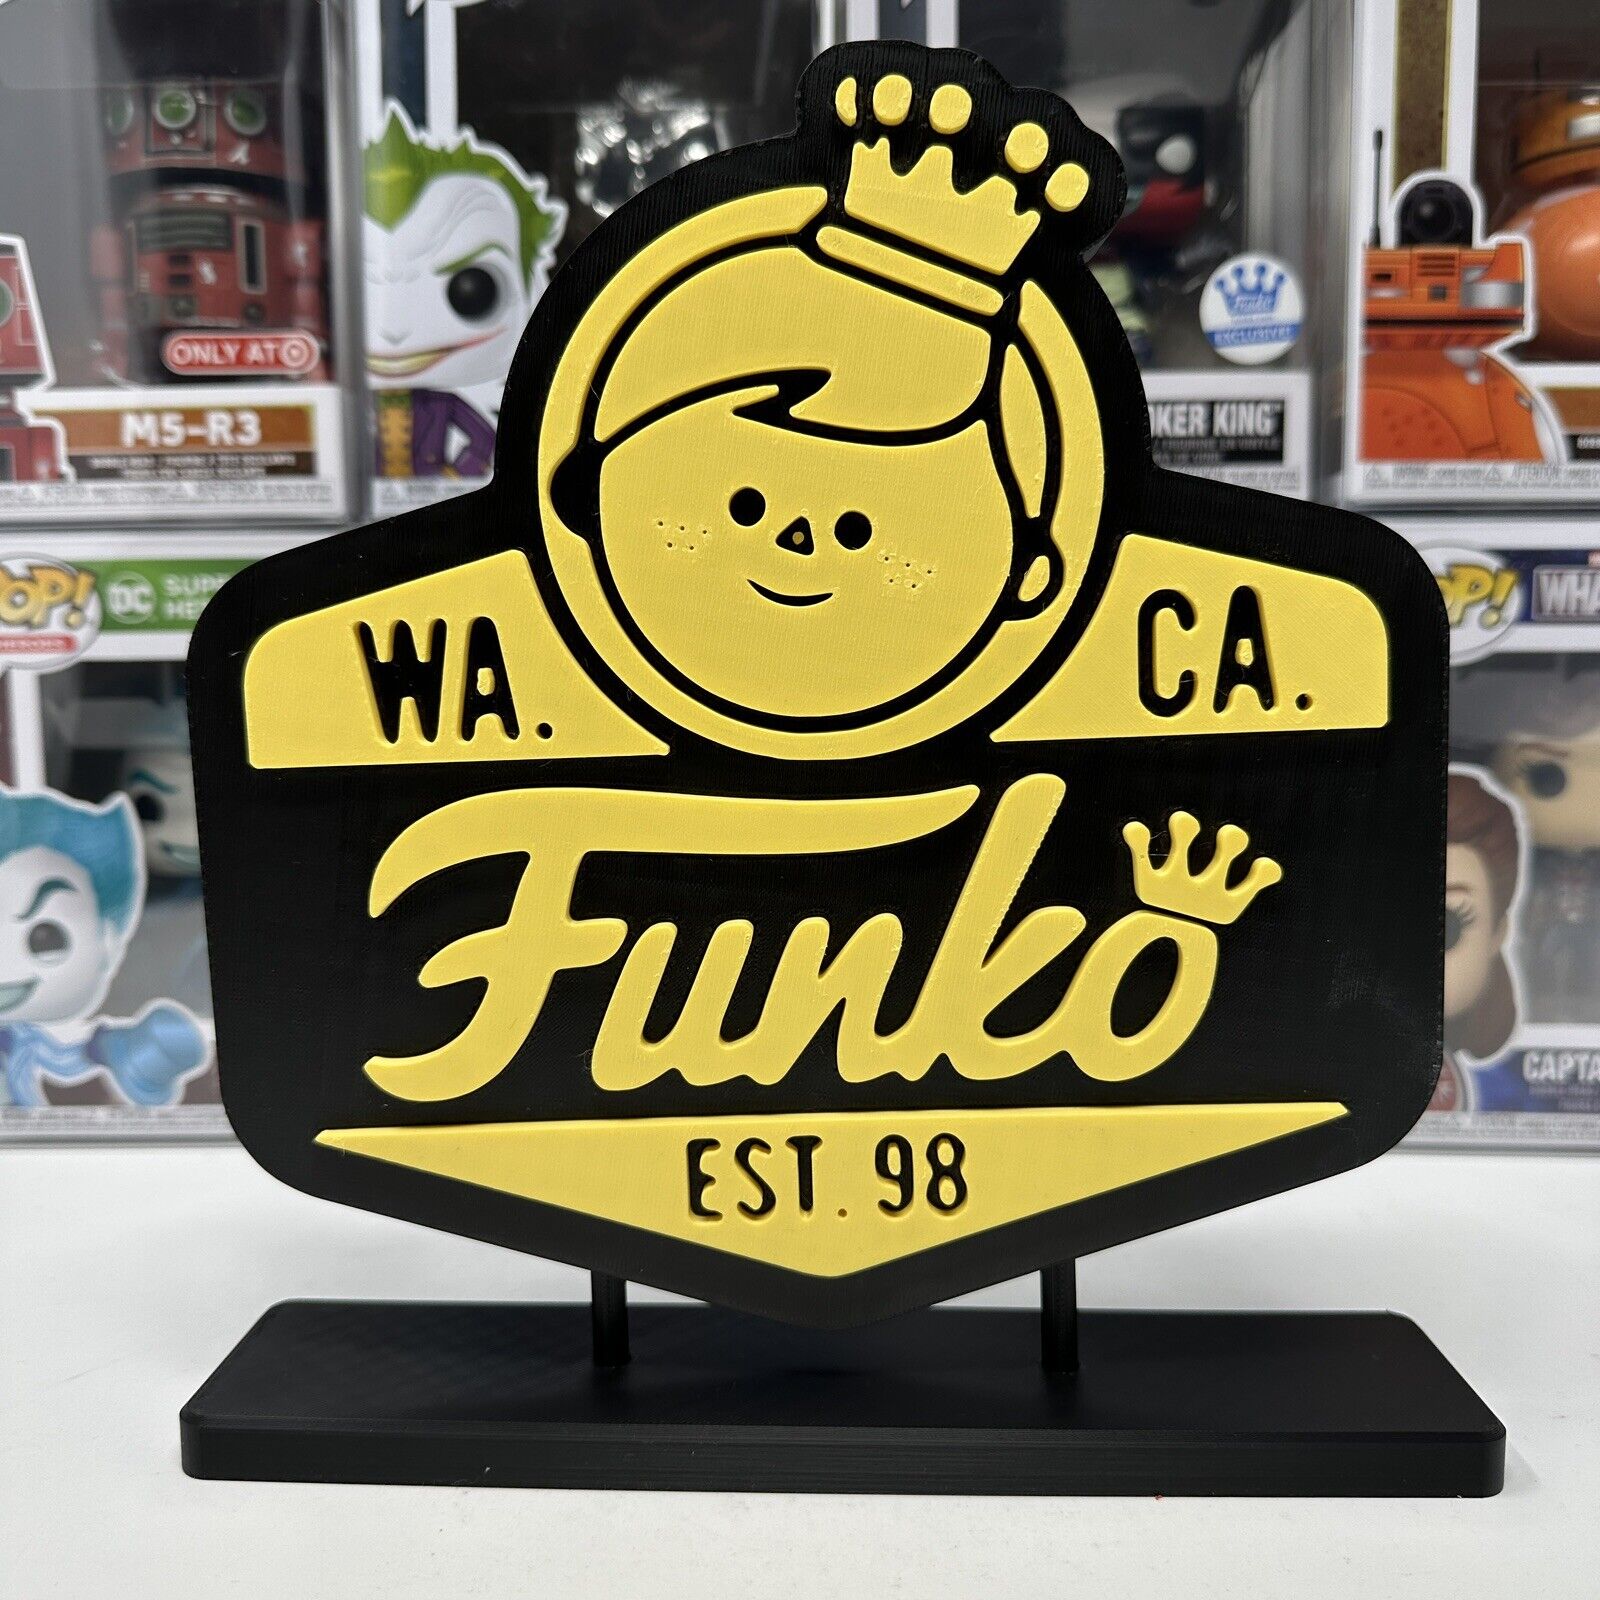 3D Printed  FUNKO FREDDY HQ FanSign for your Pops & collectibles